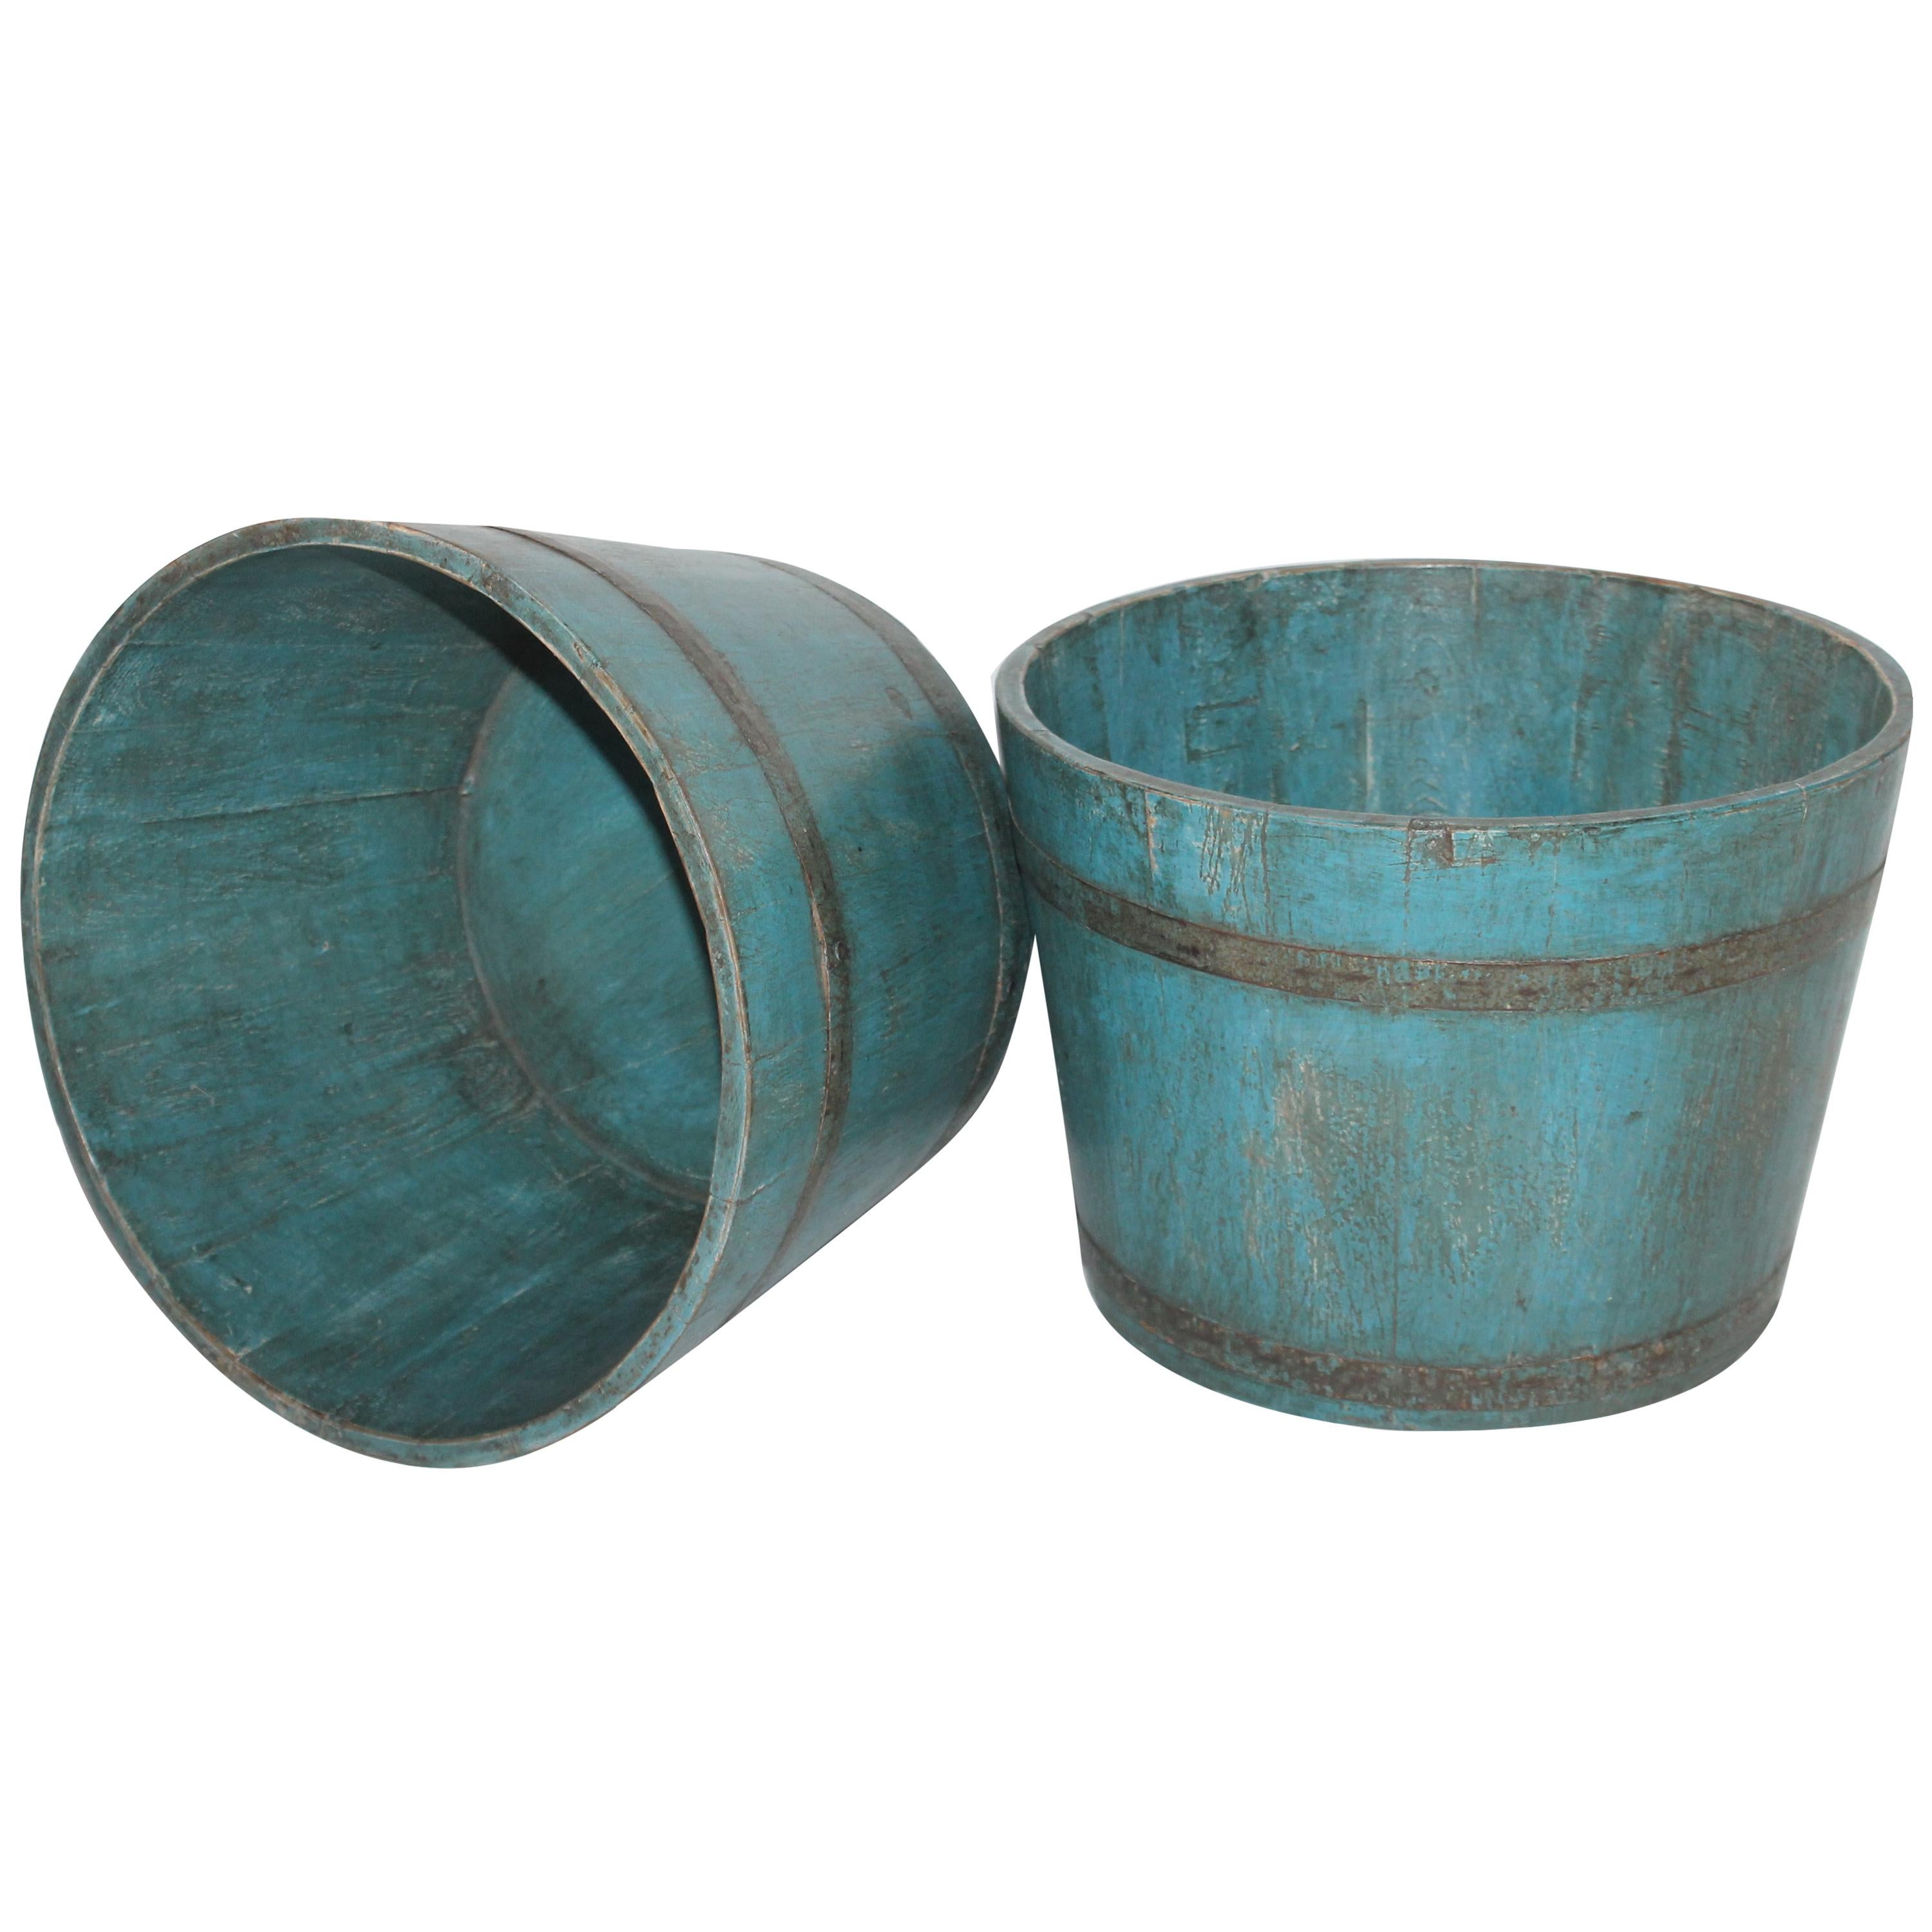 19th Century New England Blue Painted Buckets / Planters, Pair